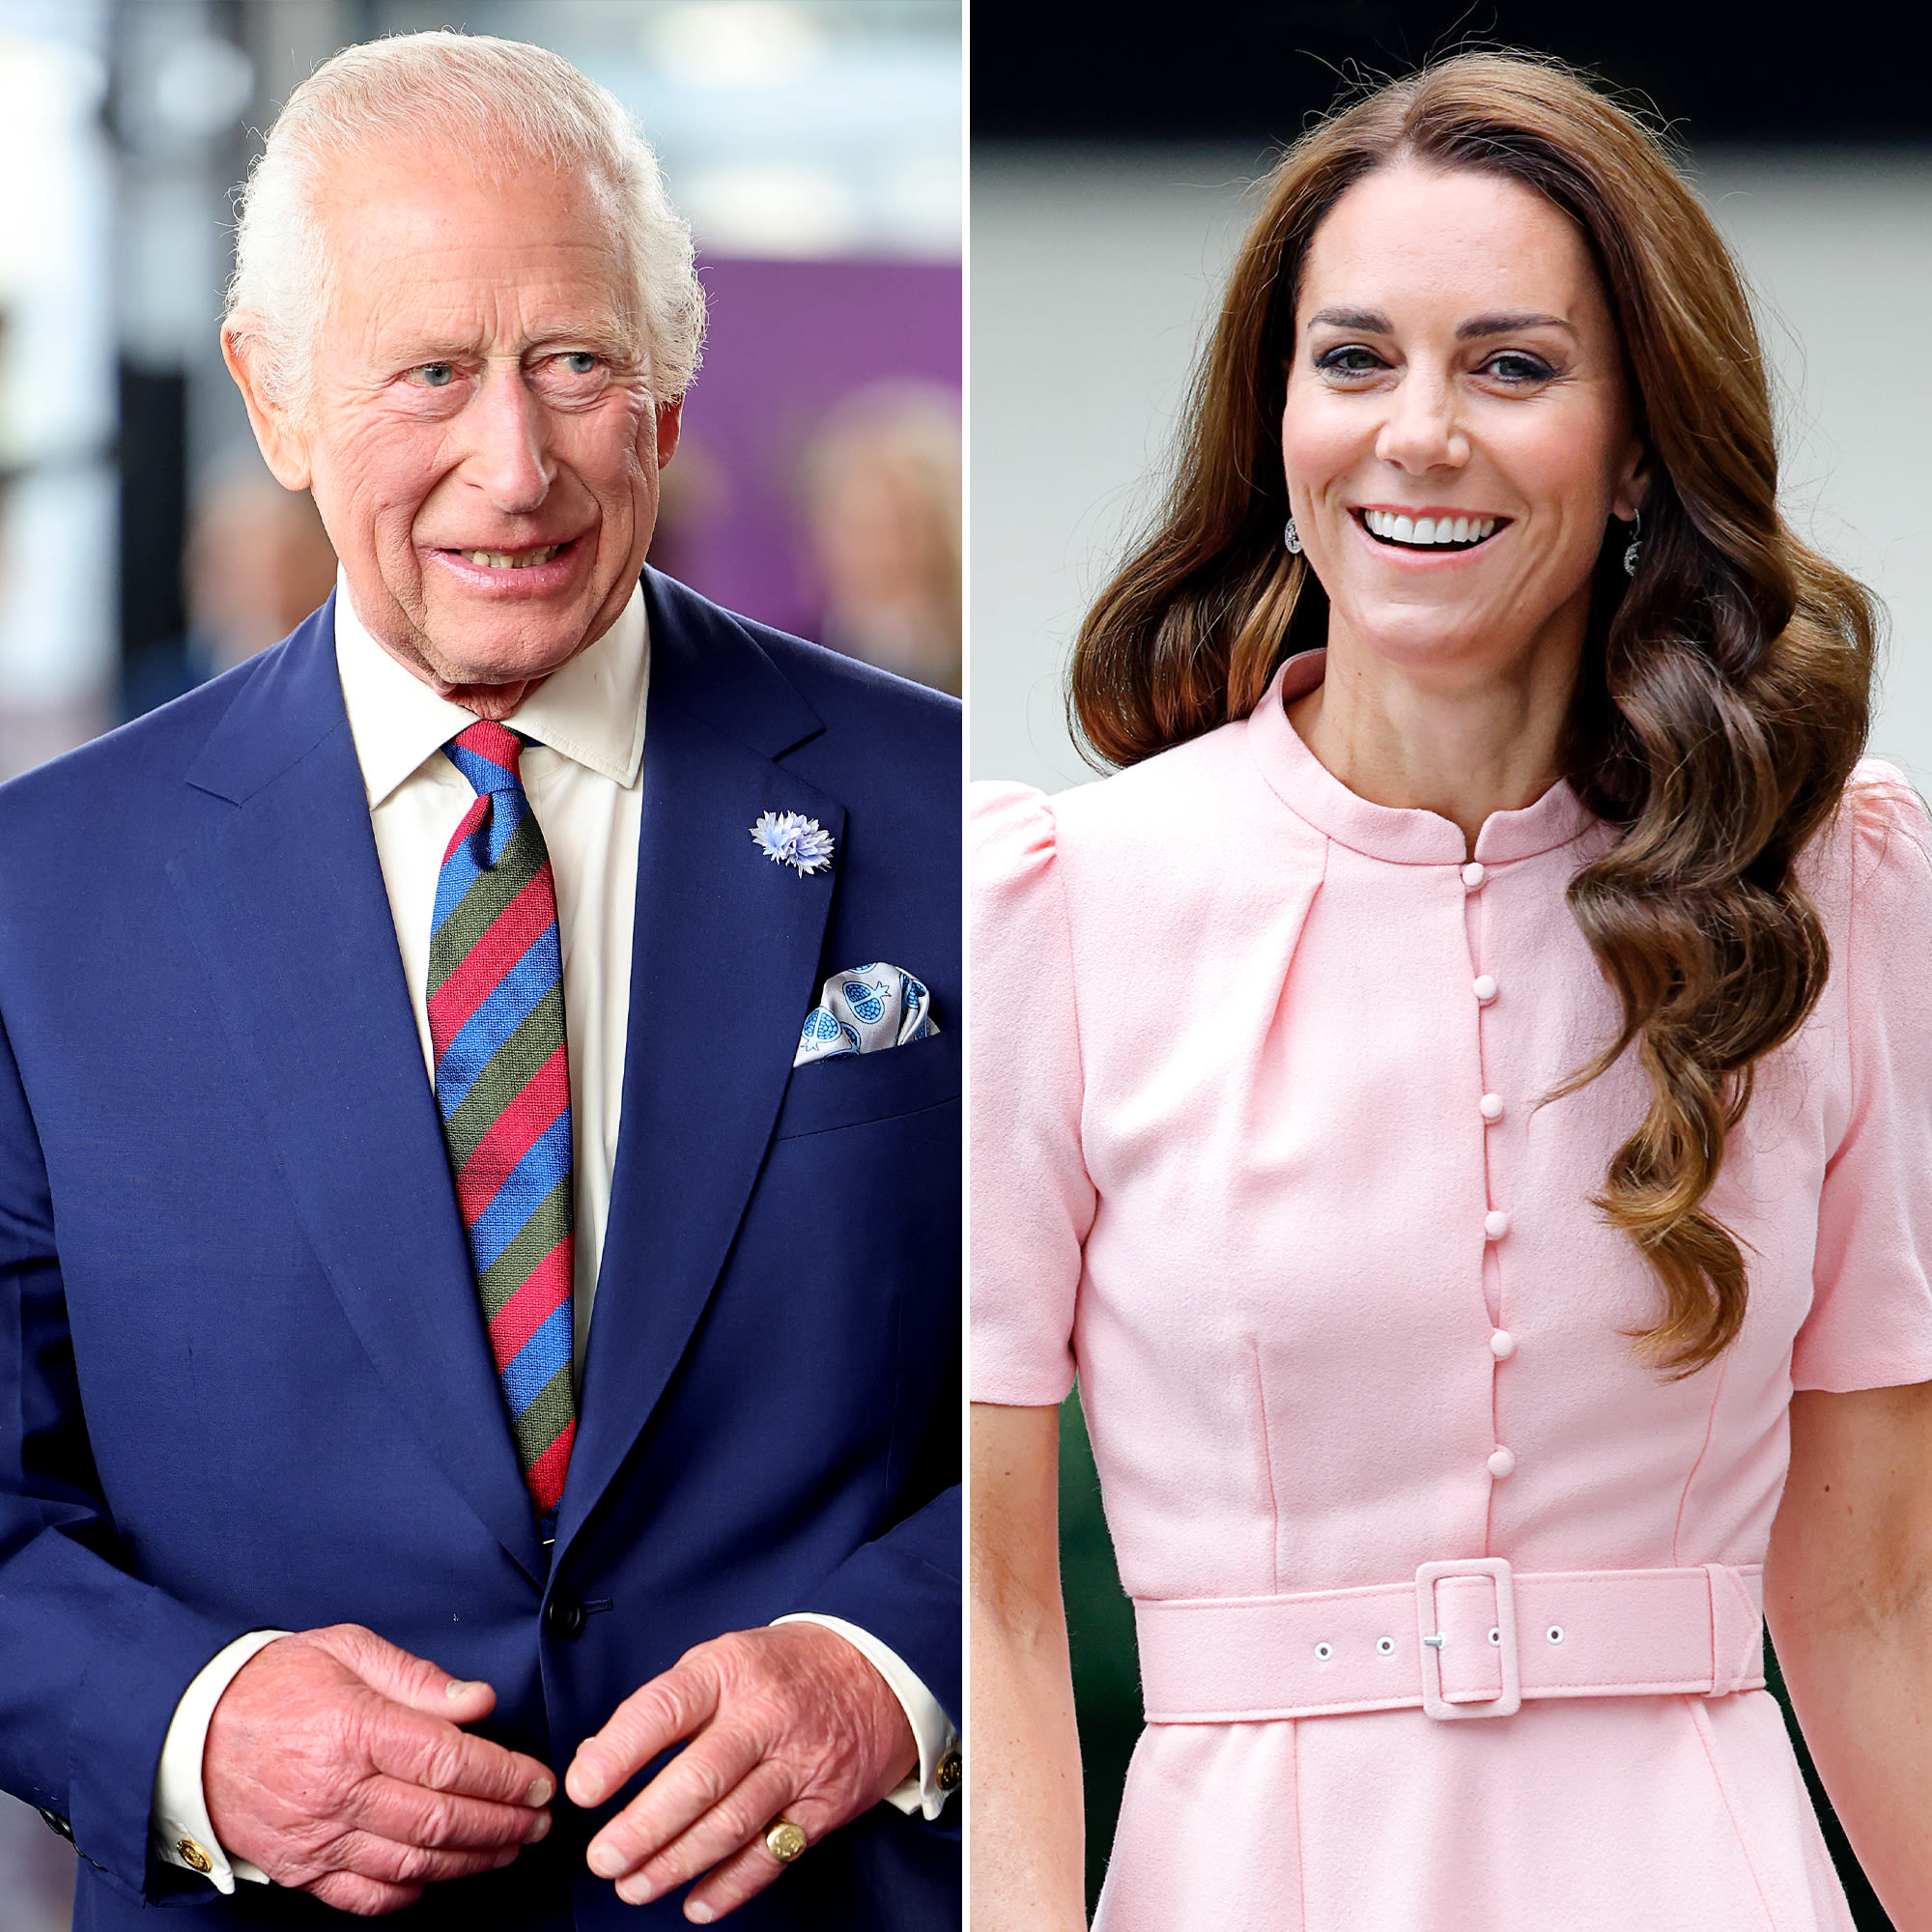 King Charles and Kate Middleton Received Nearly 30,000 Well Wishes After Cancer Diagnoses